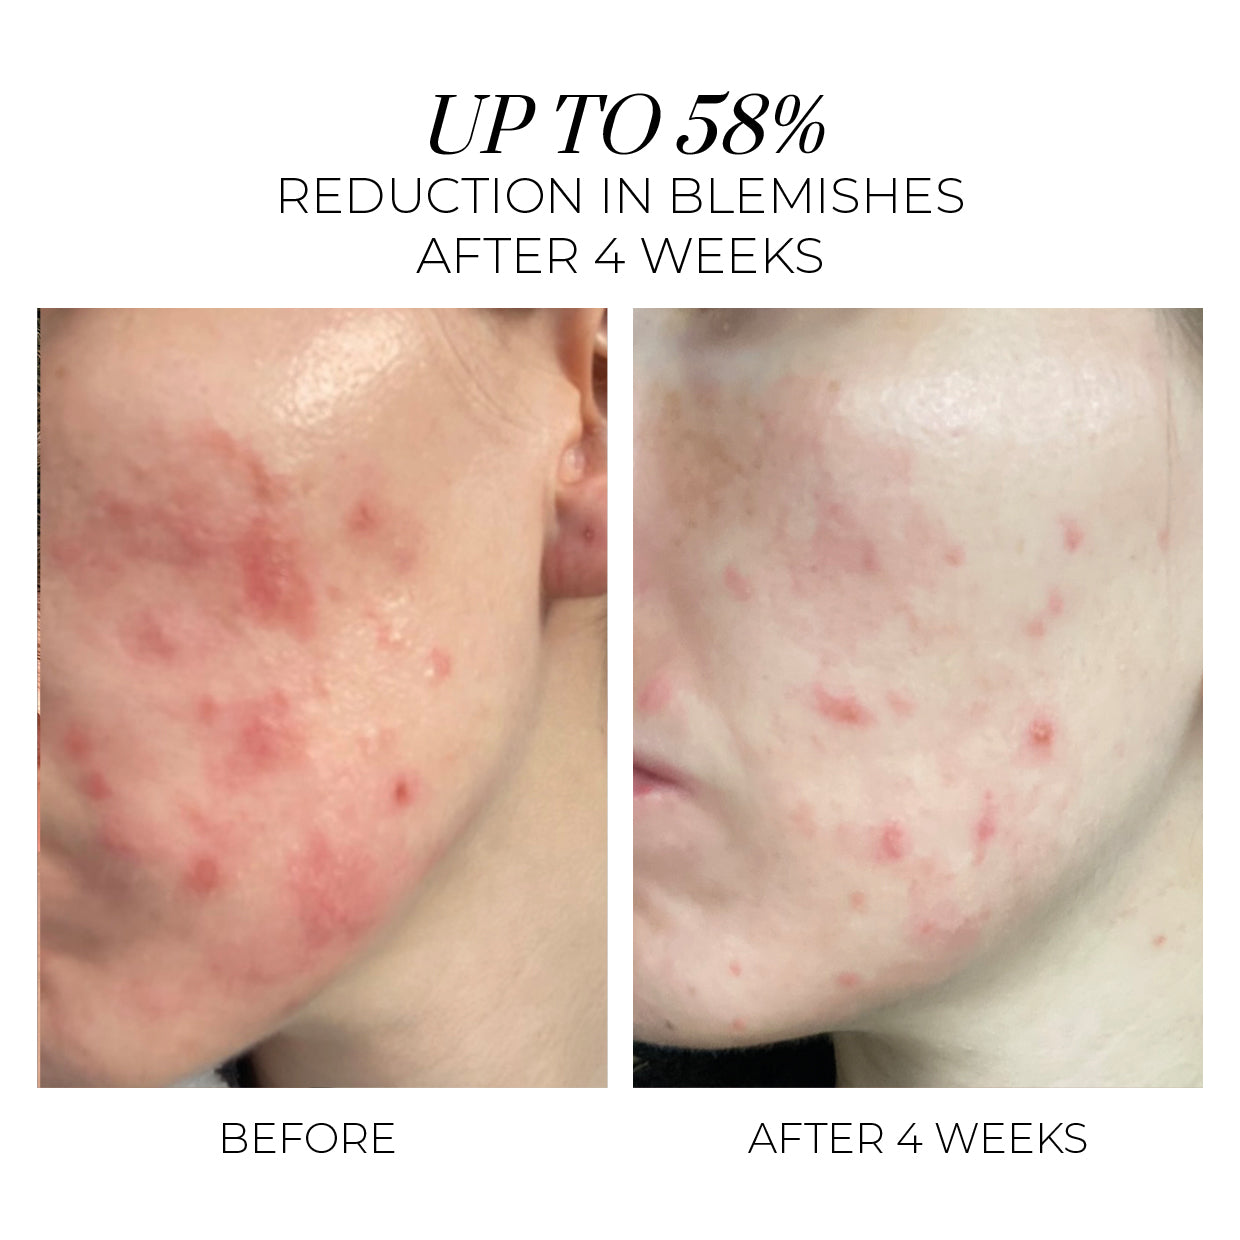 Clinical Trial Results - up to 58% reduction in blemishes after 4 weeks of using the entire Violet Water Range. 